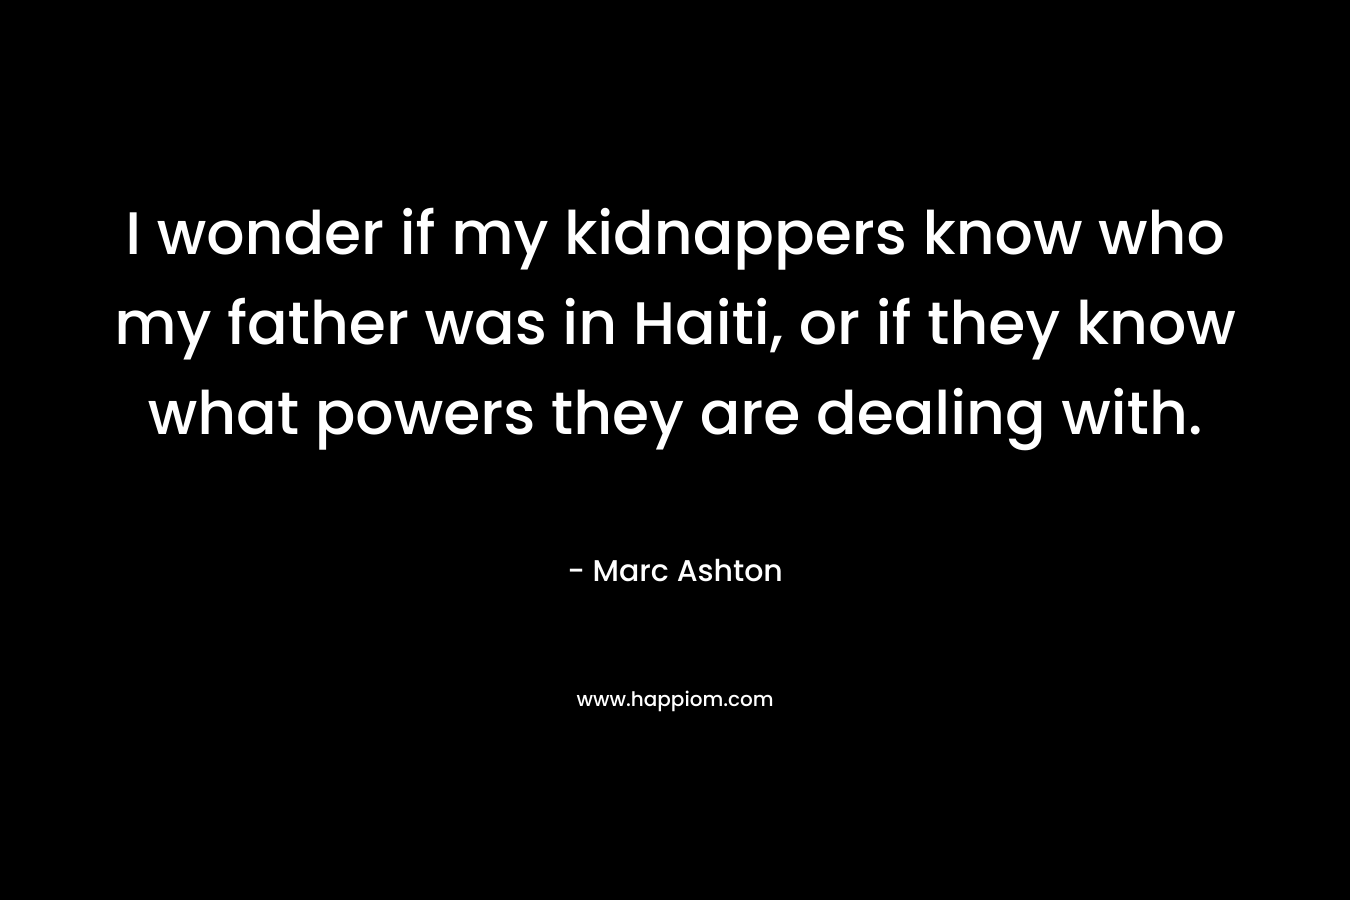 I wonder if my kidnappers know who my father was in Haiti, or if they know what powers they are dealing with. – Marc Ashton